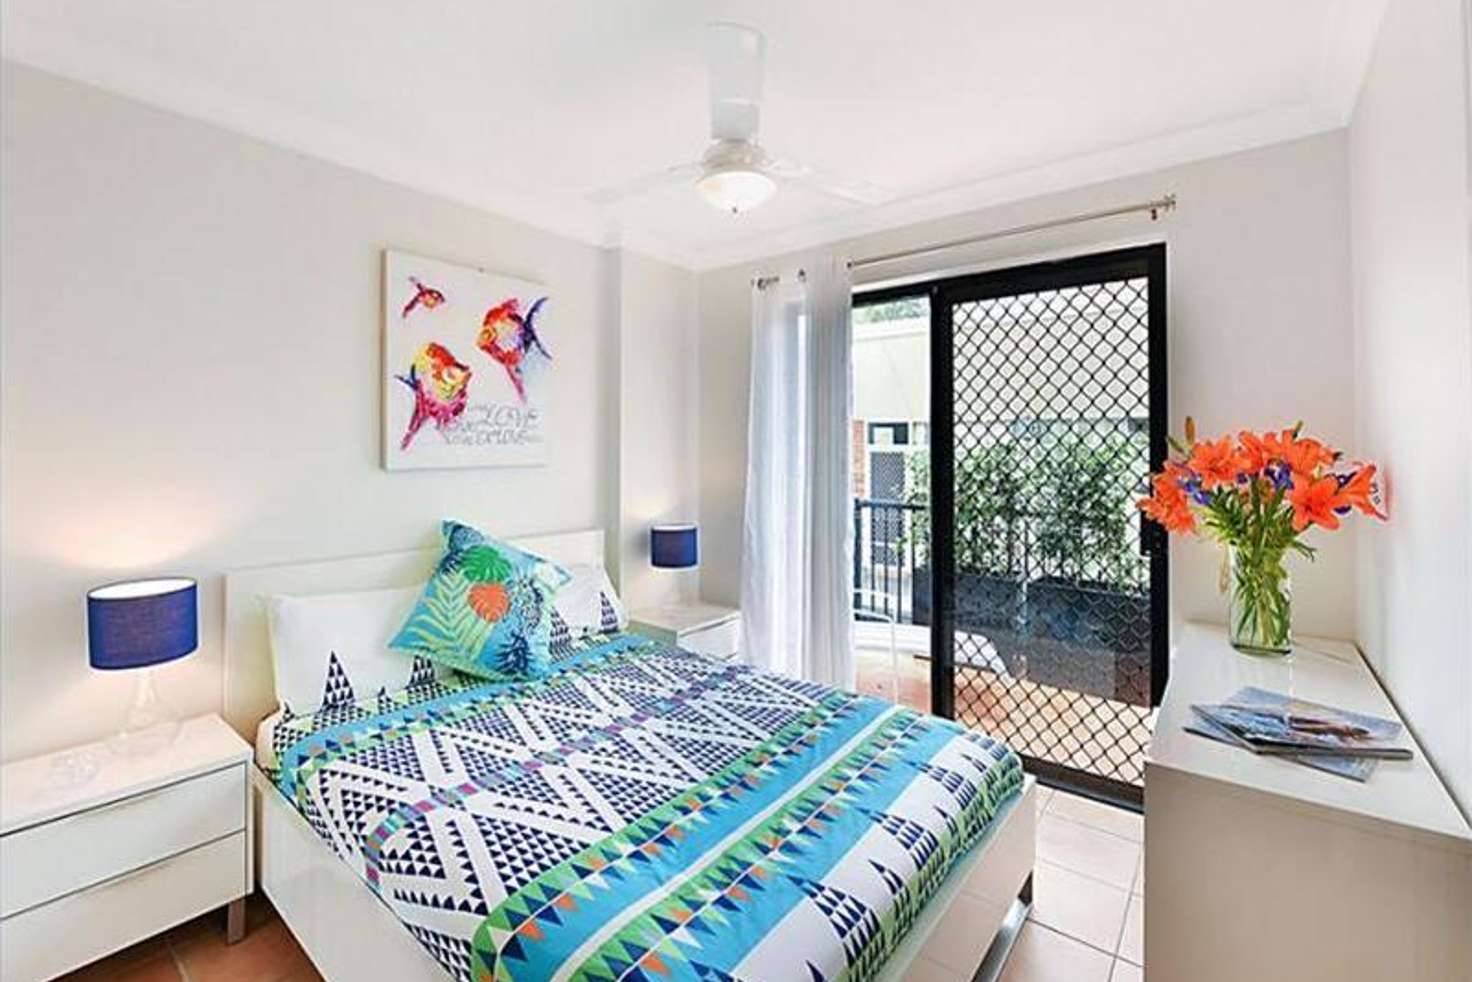 Main view of Homely apartment listing, 12 Paradise Island, Surfers Paradise QLD 4217